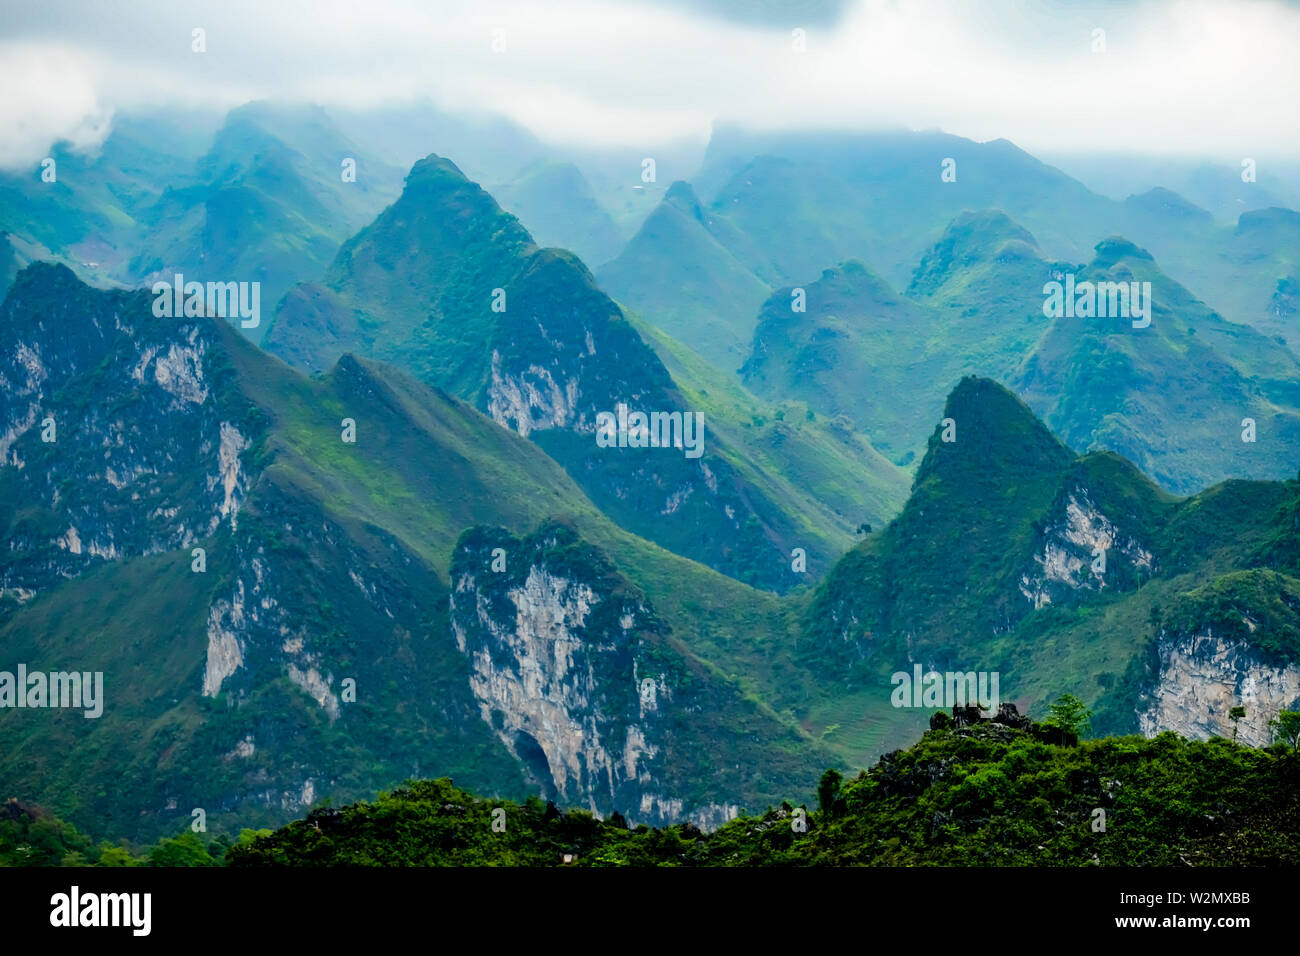 Dramatic karst outcrops in the Dong Van Geopark, Vietnam Stock Photo